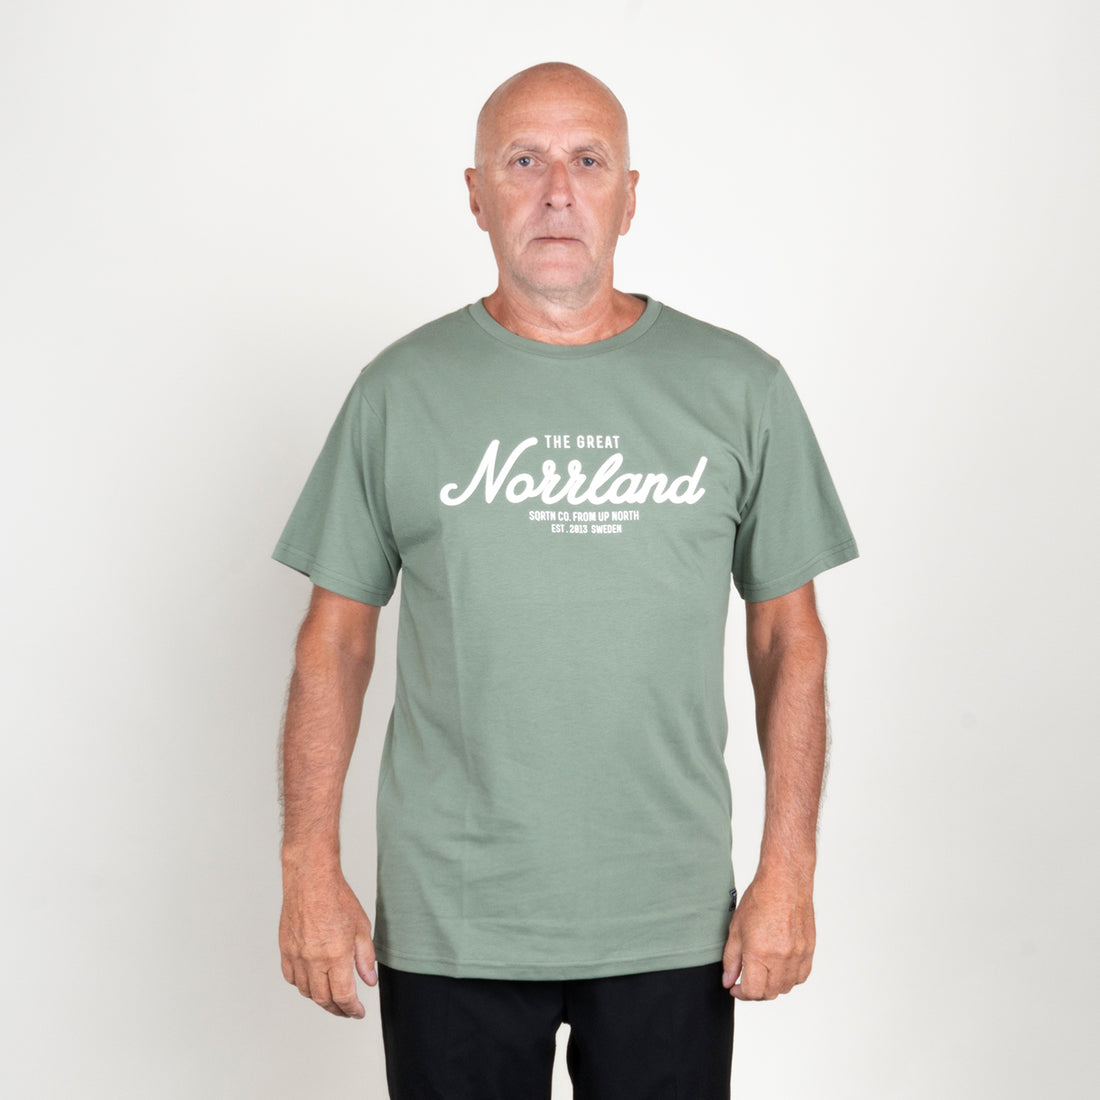 GREAT NORRLAND T-SHIRT - OLIVE DUST